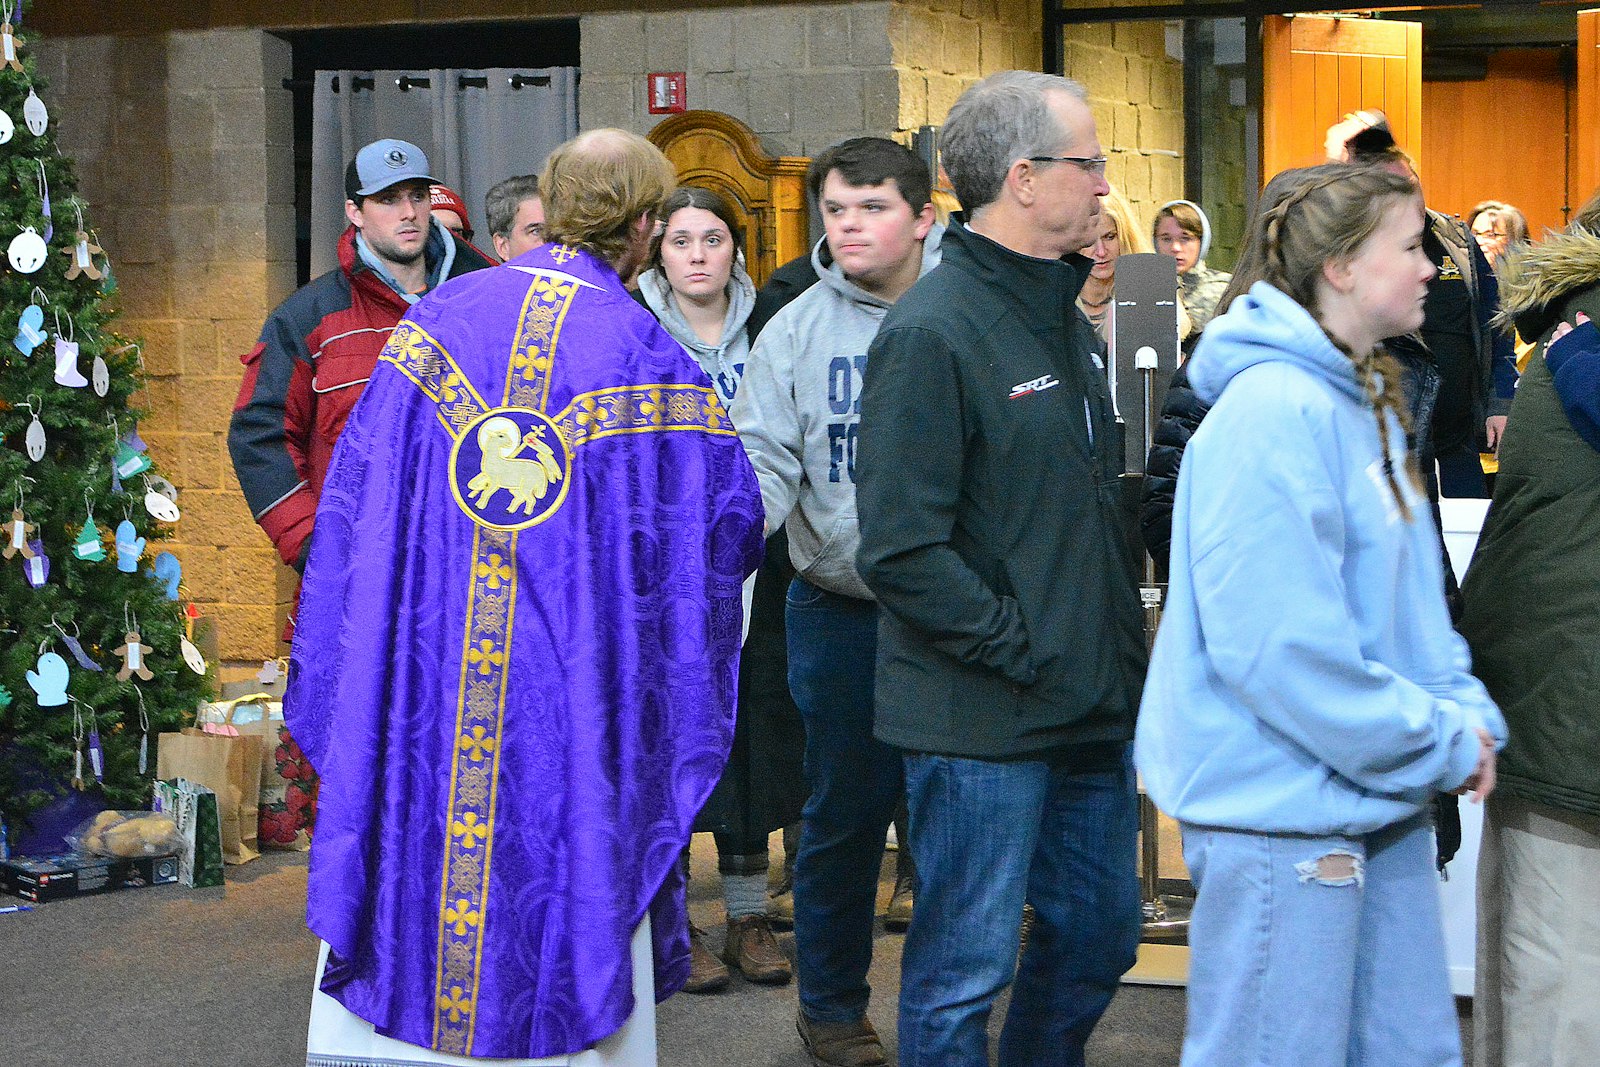 St. Joseph associate pastor Fr. John Carlin greets Oxford High School students, parents, alumni and community members Nov. 30 for a Mass of healing at the Lake Orion parish.